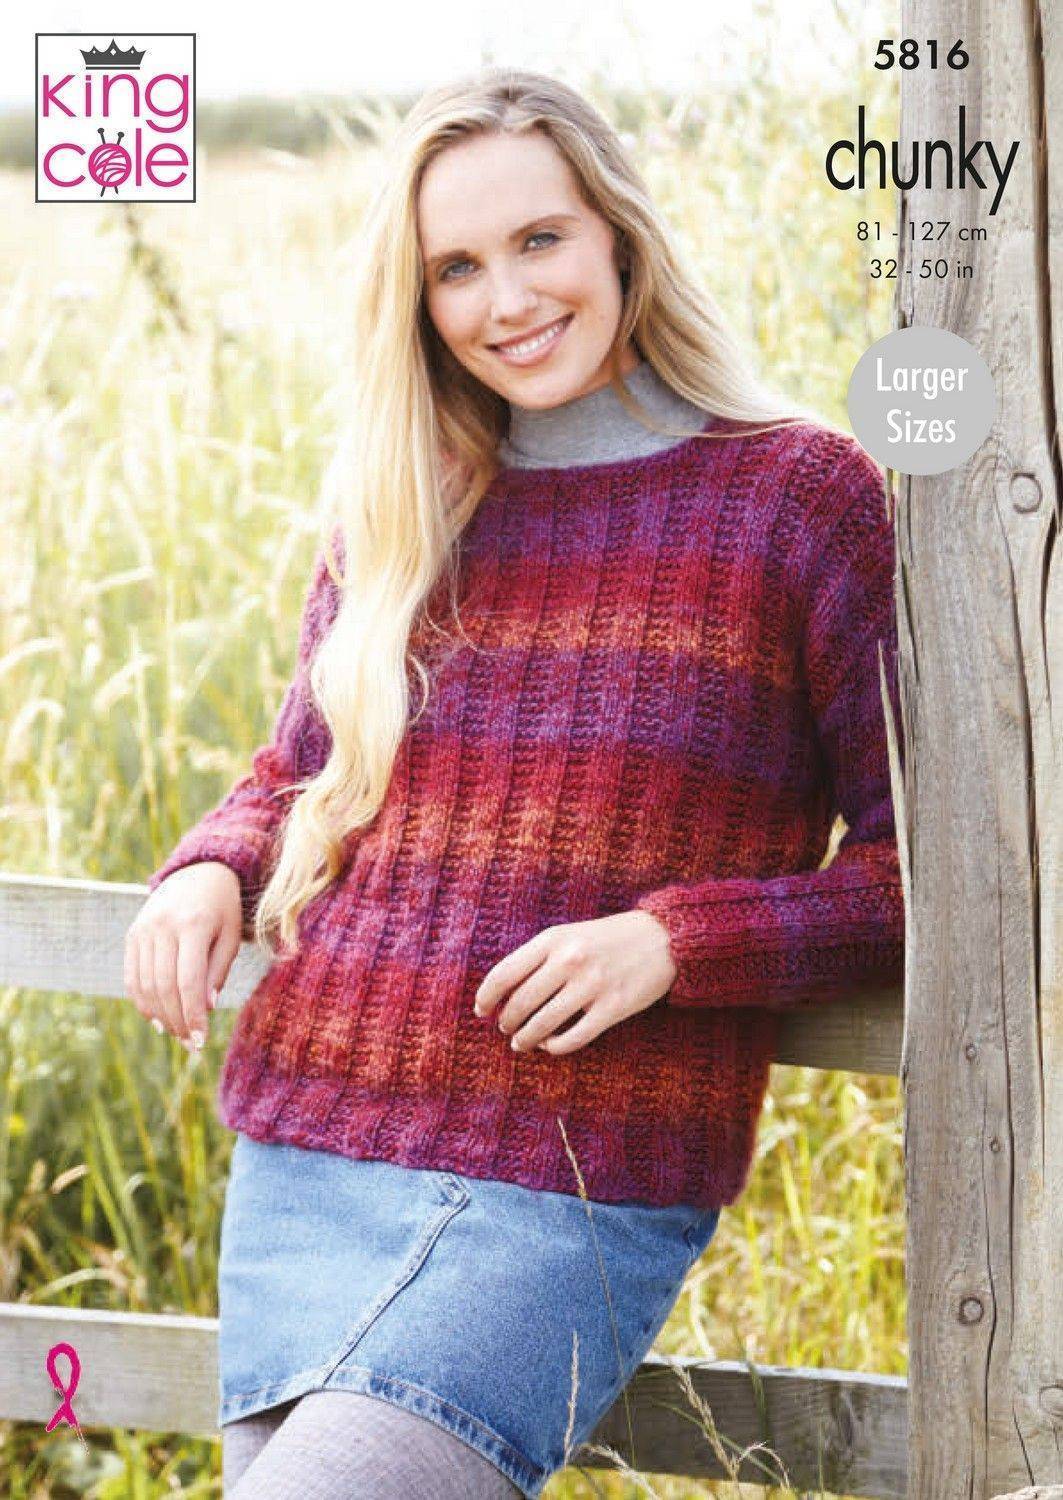 Sweater and Tunic in King Cole Autumn Chunky (5816) | The Knitting Network